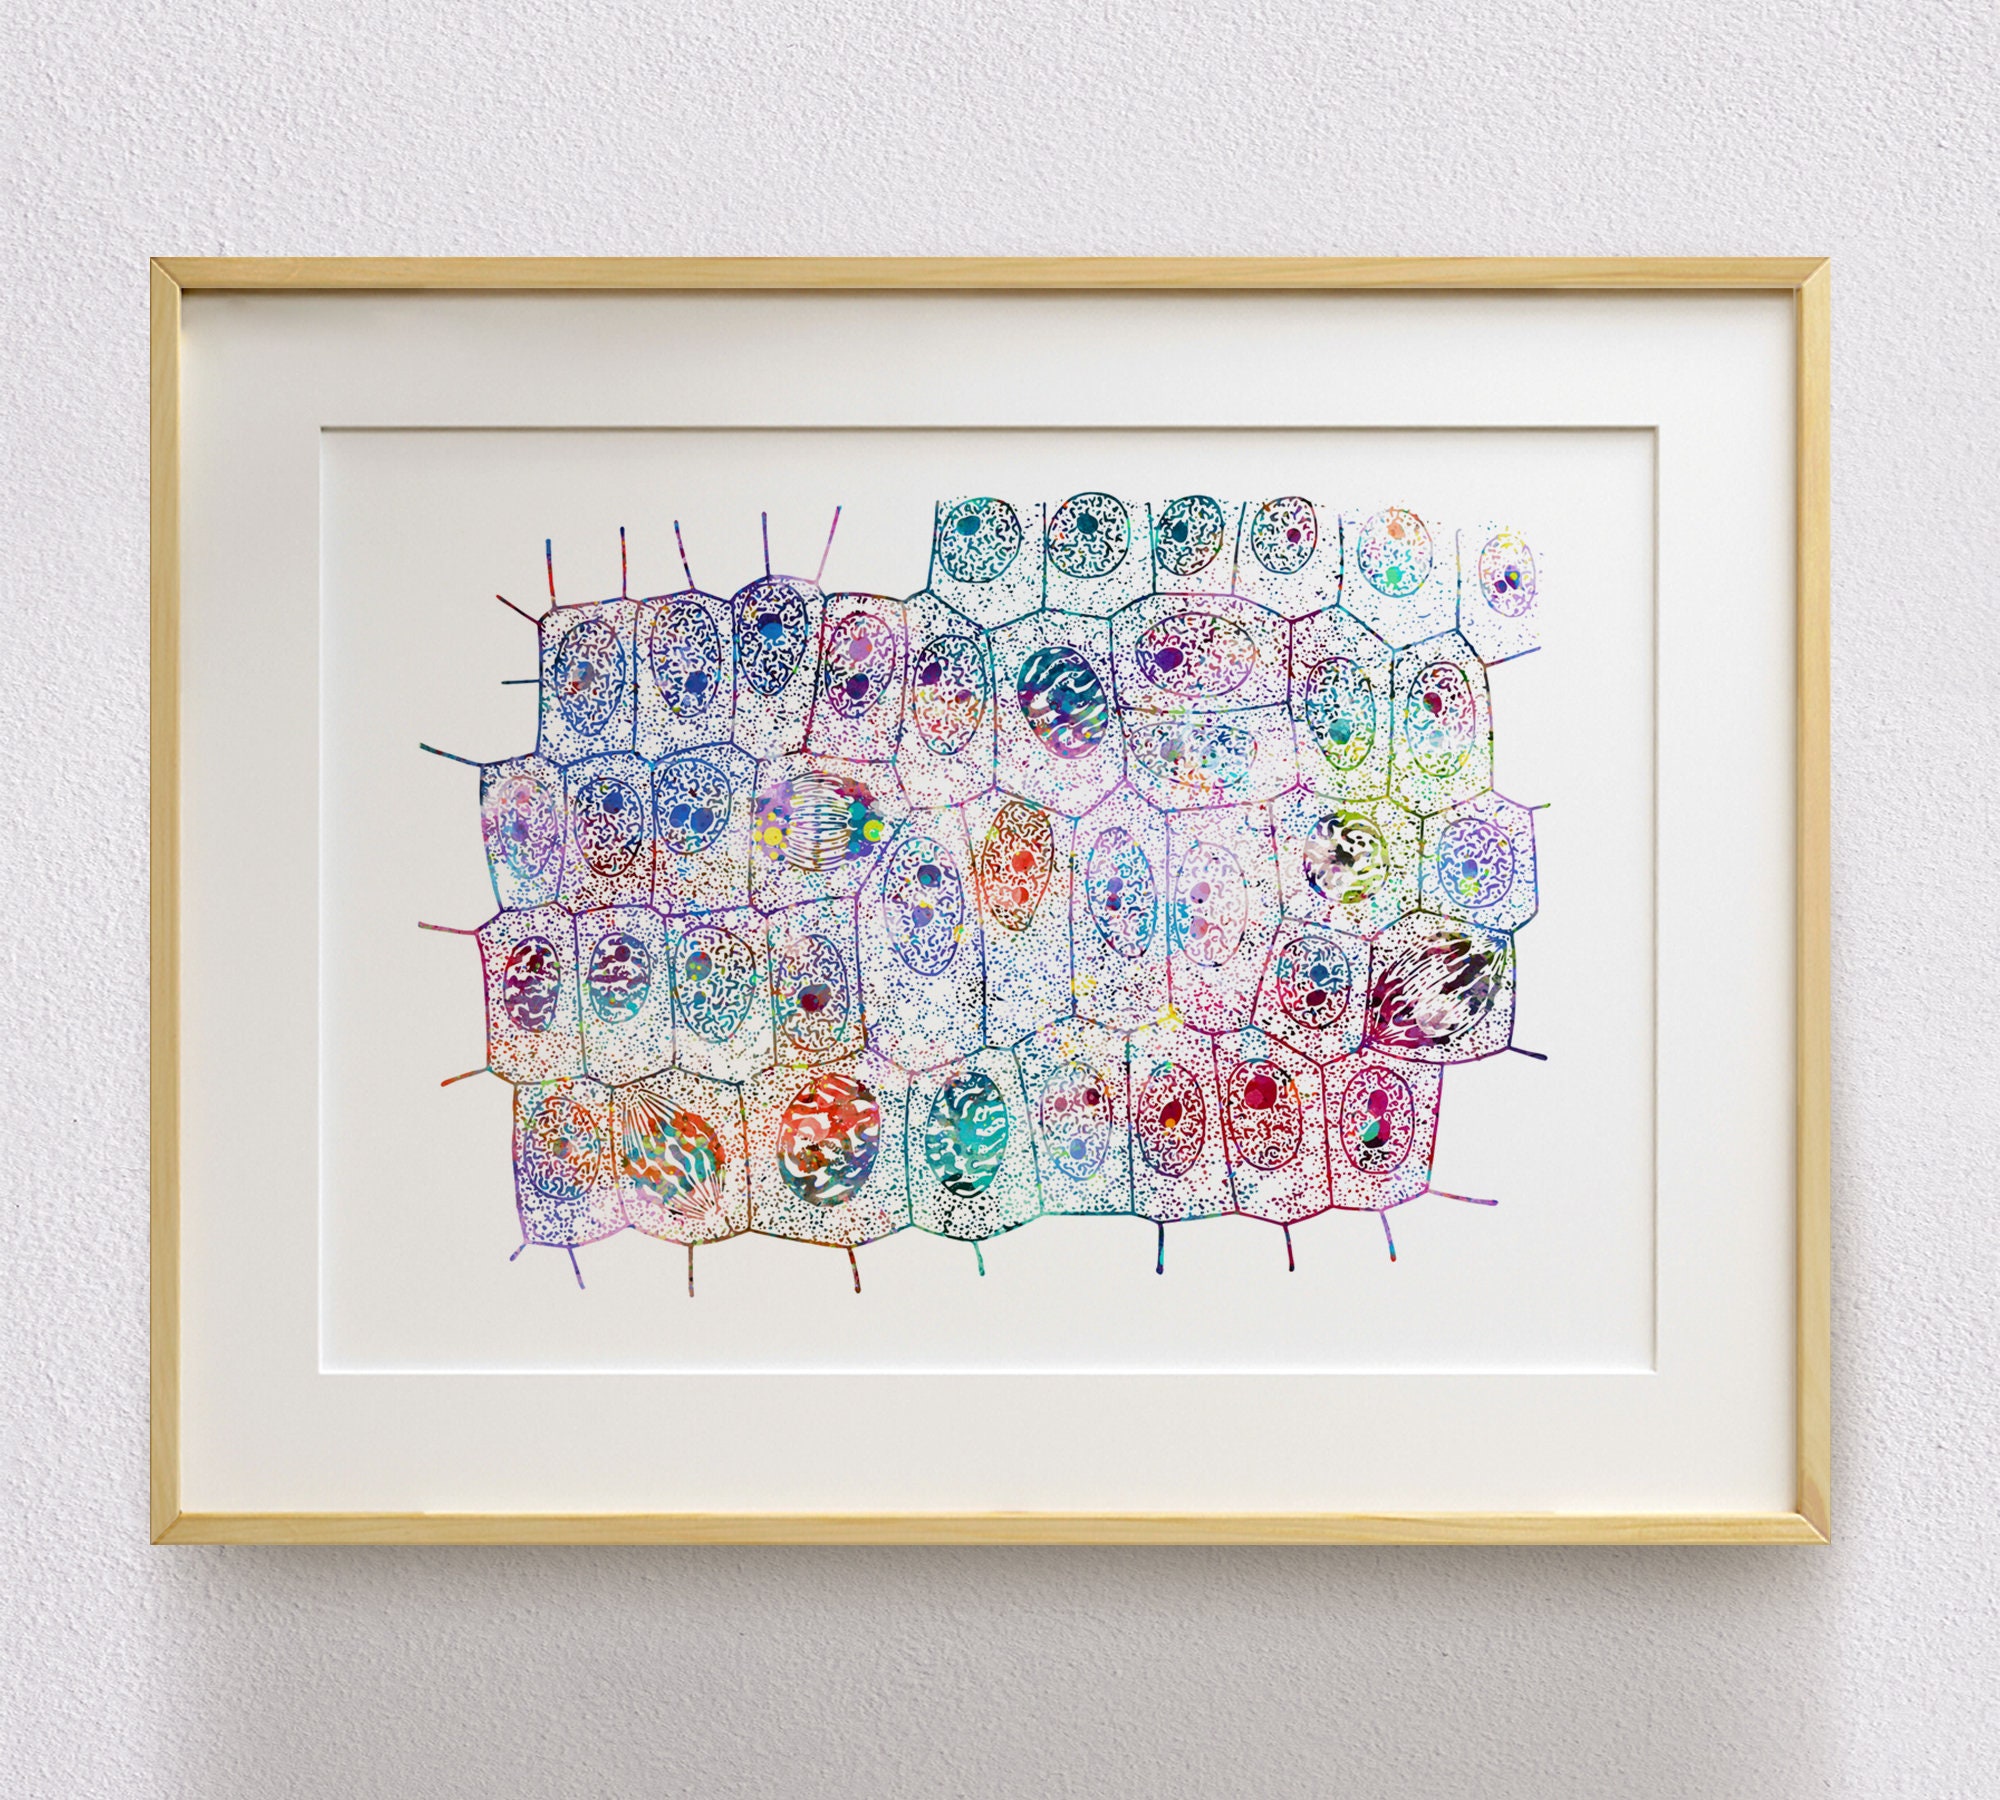 Molecular Compass for Cell Division Science Art Print on Paper Canvas Biology, Mitosis, Brain Development, Vintage, RNA, PhD Acrylic